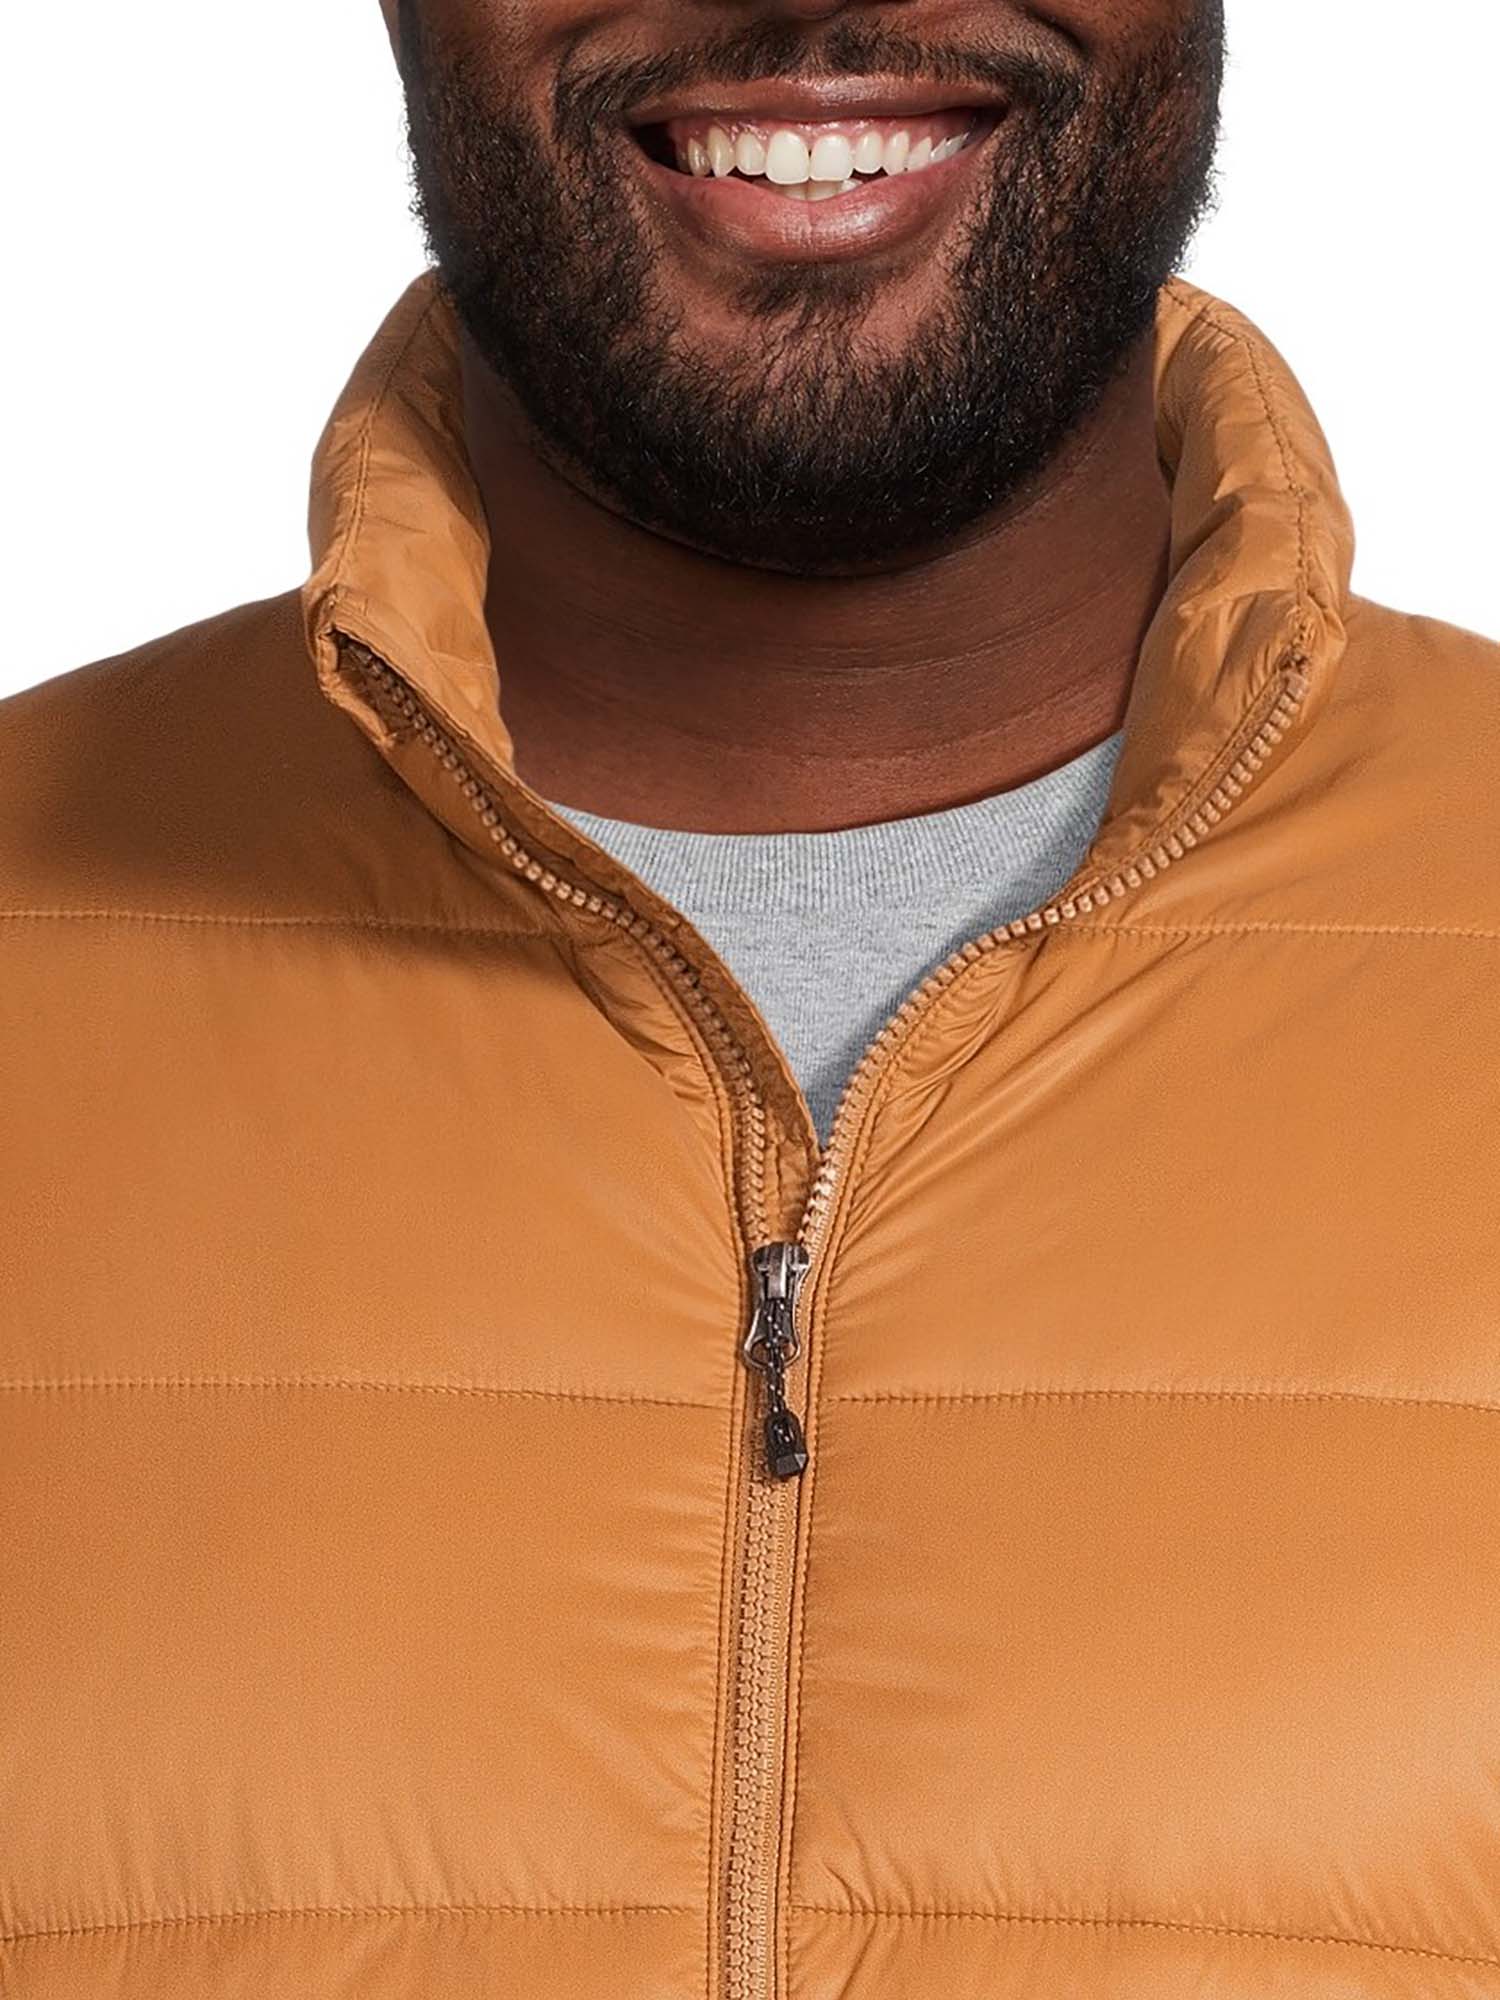 Swiss Tech Men's and Big Men's Packable Puffer Jacket, Sizes S-3XL - image 5 of 6